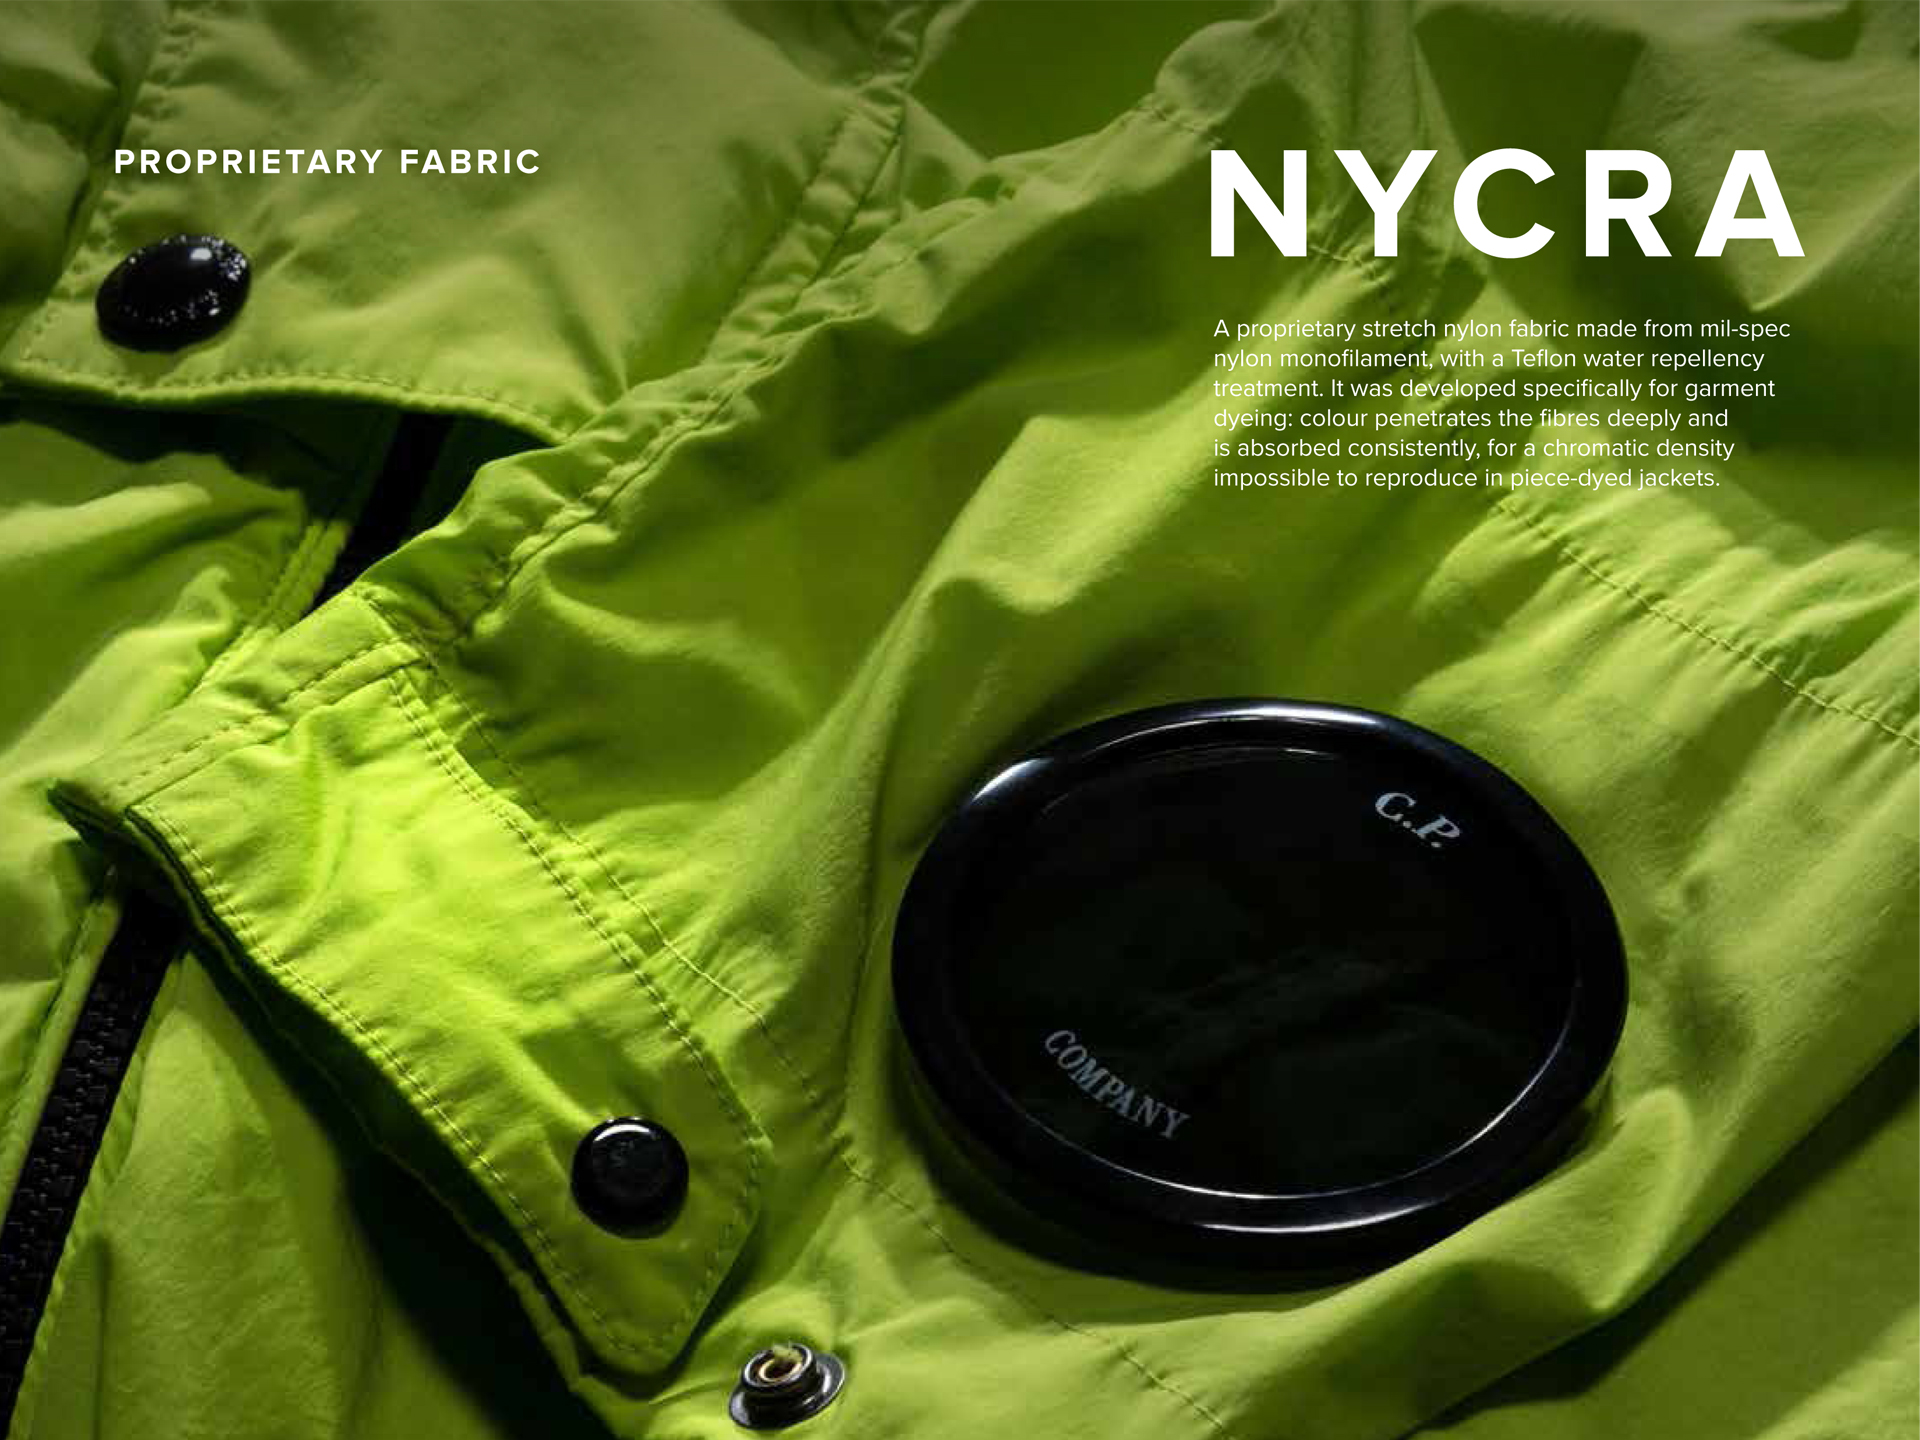 Company Nycra Proprietary Fabric , HD Wallpaper & Backgrounds